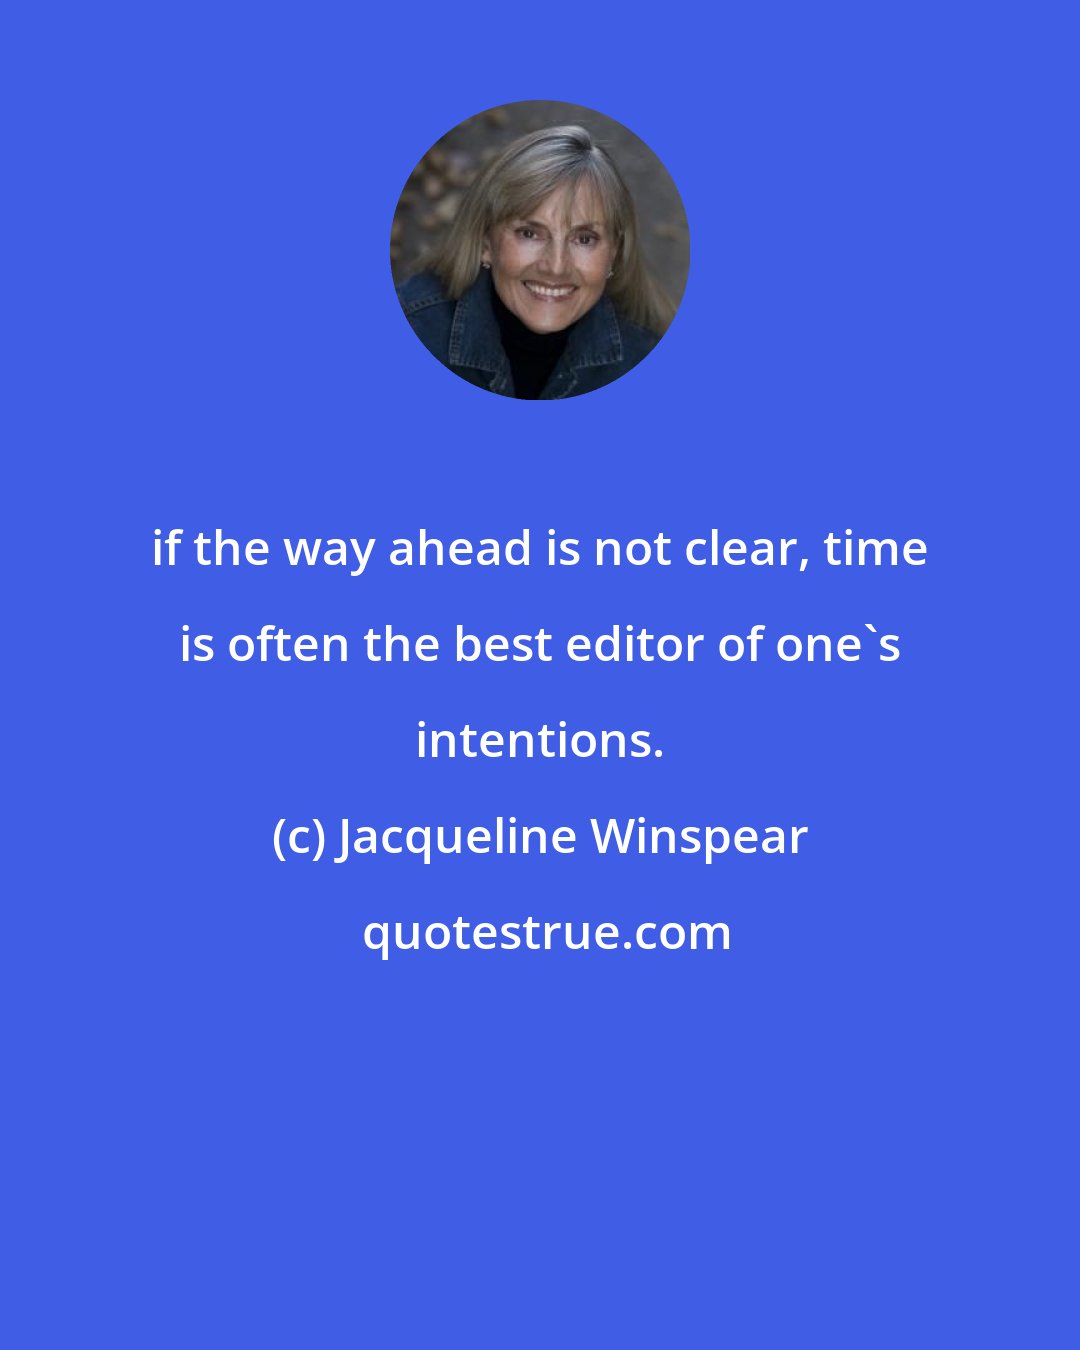 Jacqueline Winspear: if the way ahead is not clear, time is often the best editor of one's intentions.